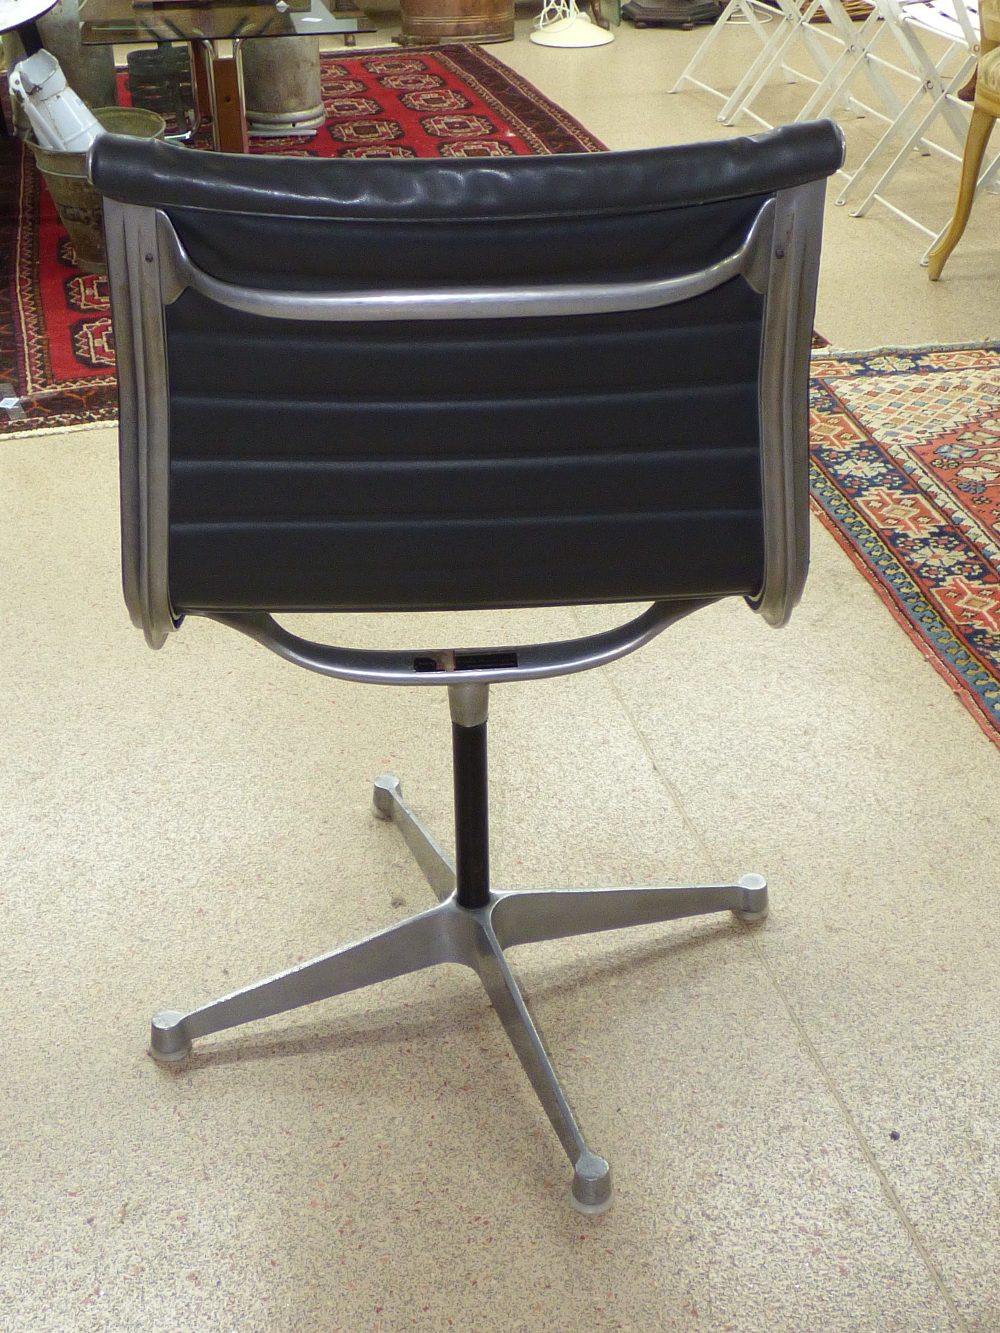 MID CENTURY HERMAN MILLER CHARLES EAMES CHAIR - Image 4 of 7